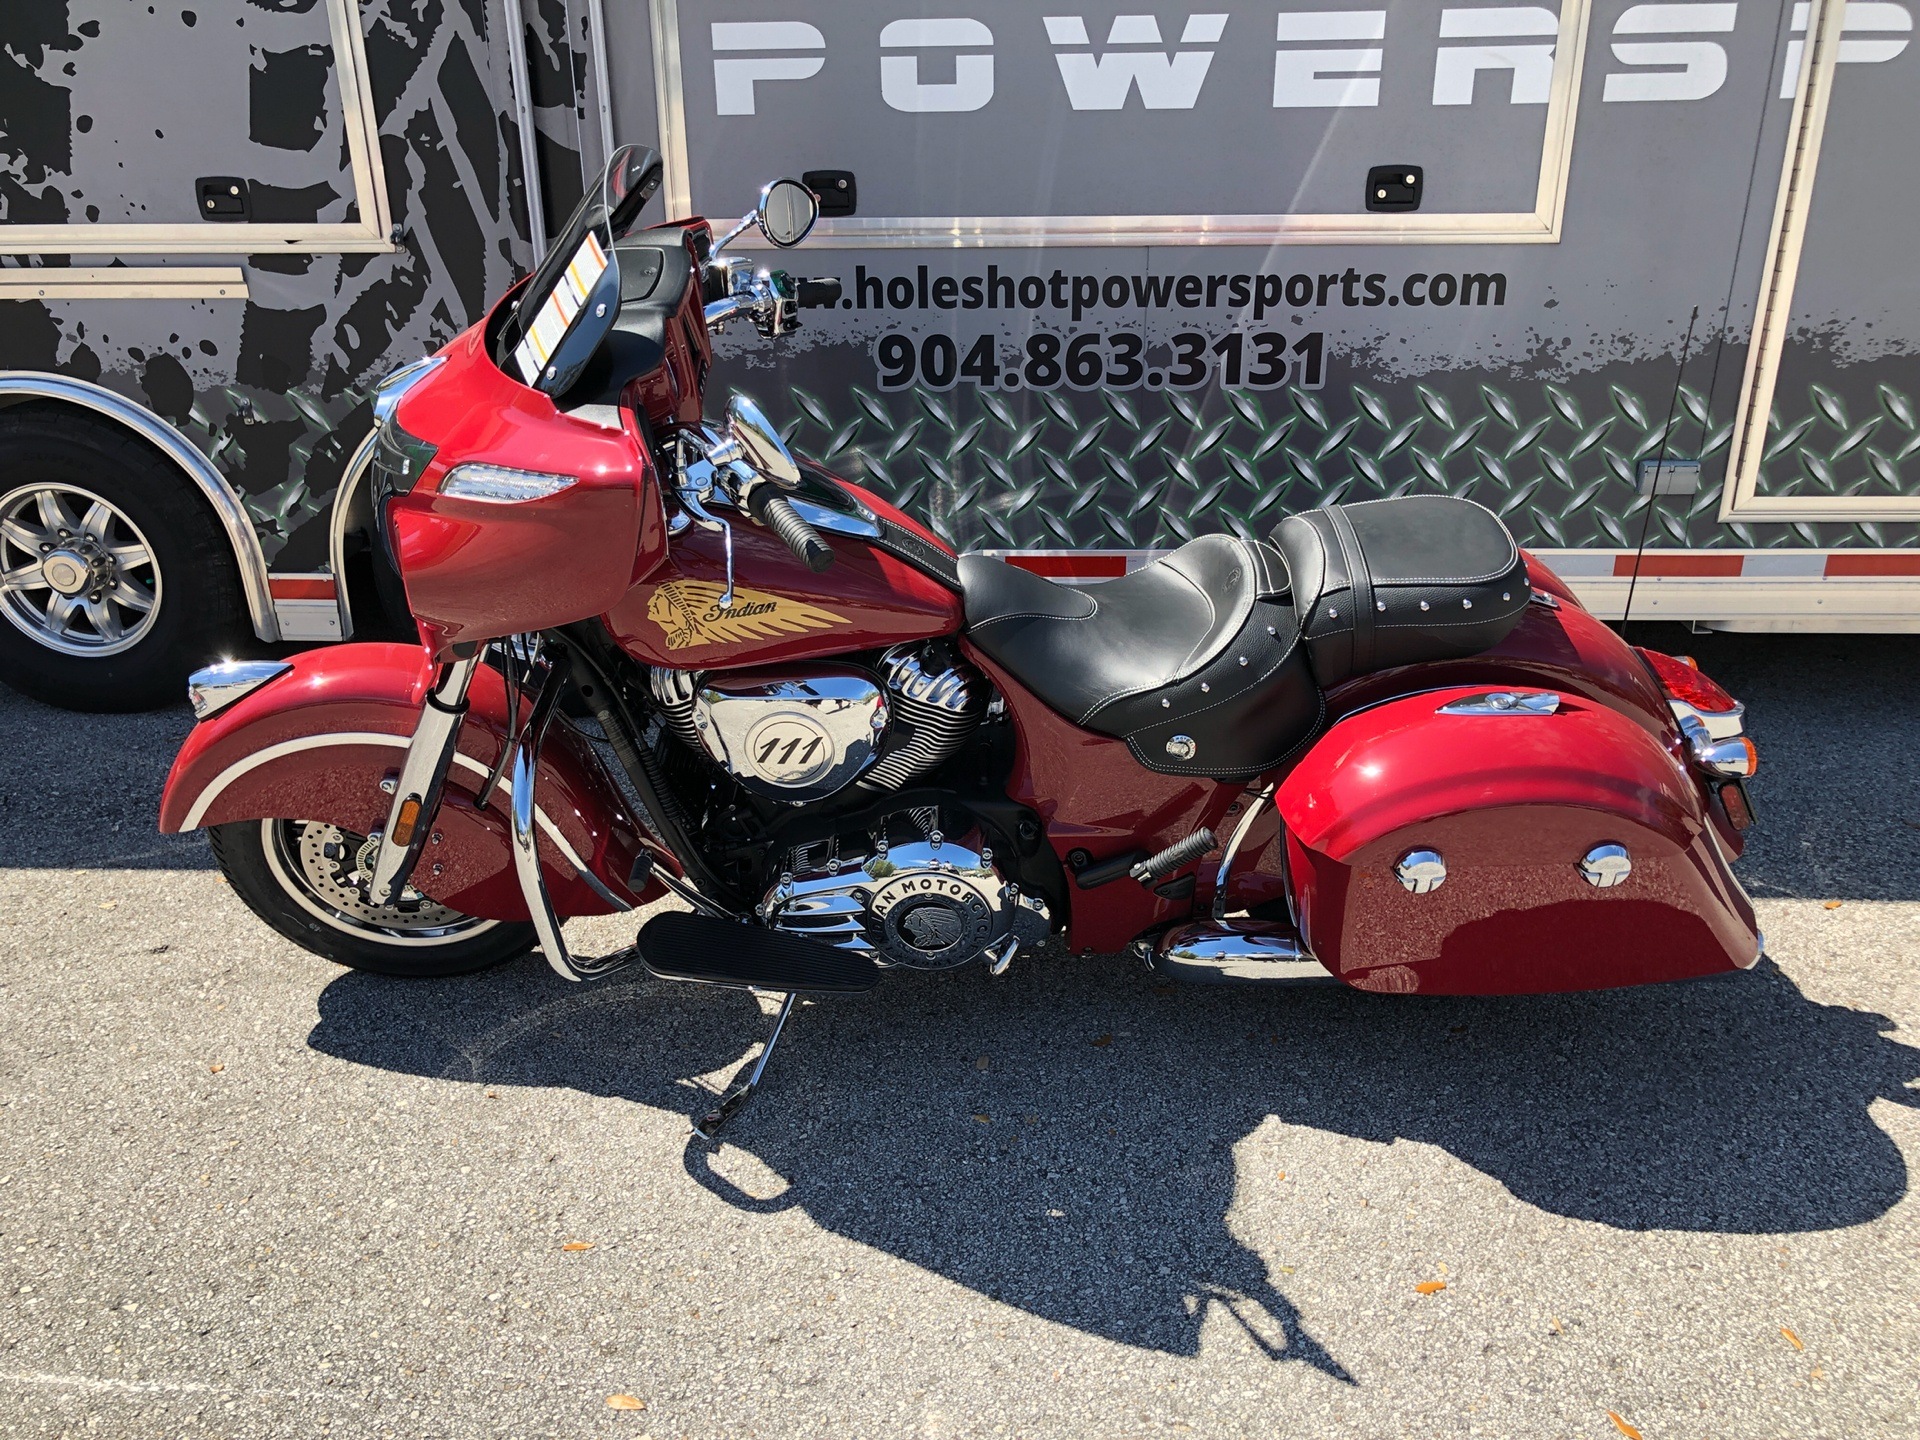 2018 Indian Chieftain Classic Motorcycles Fleming Island Florida